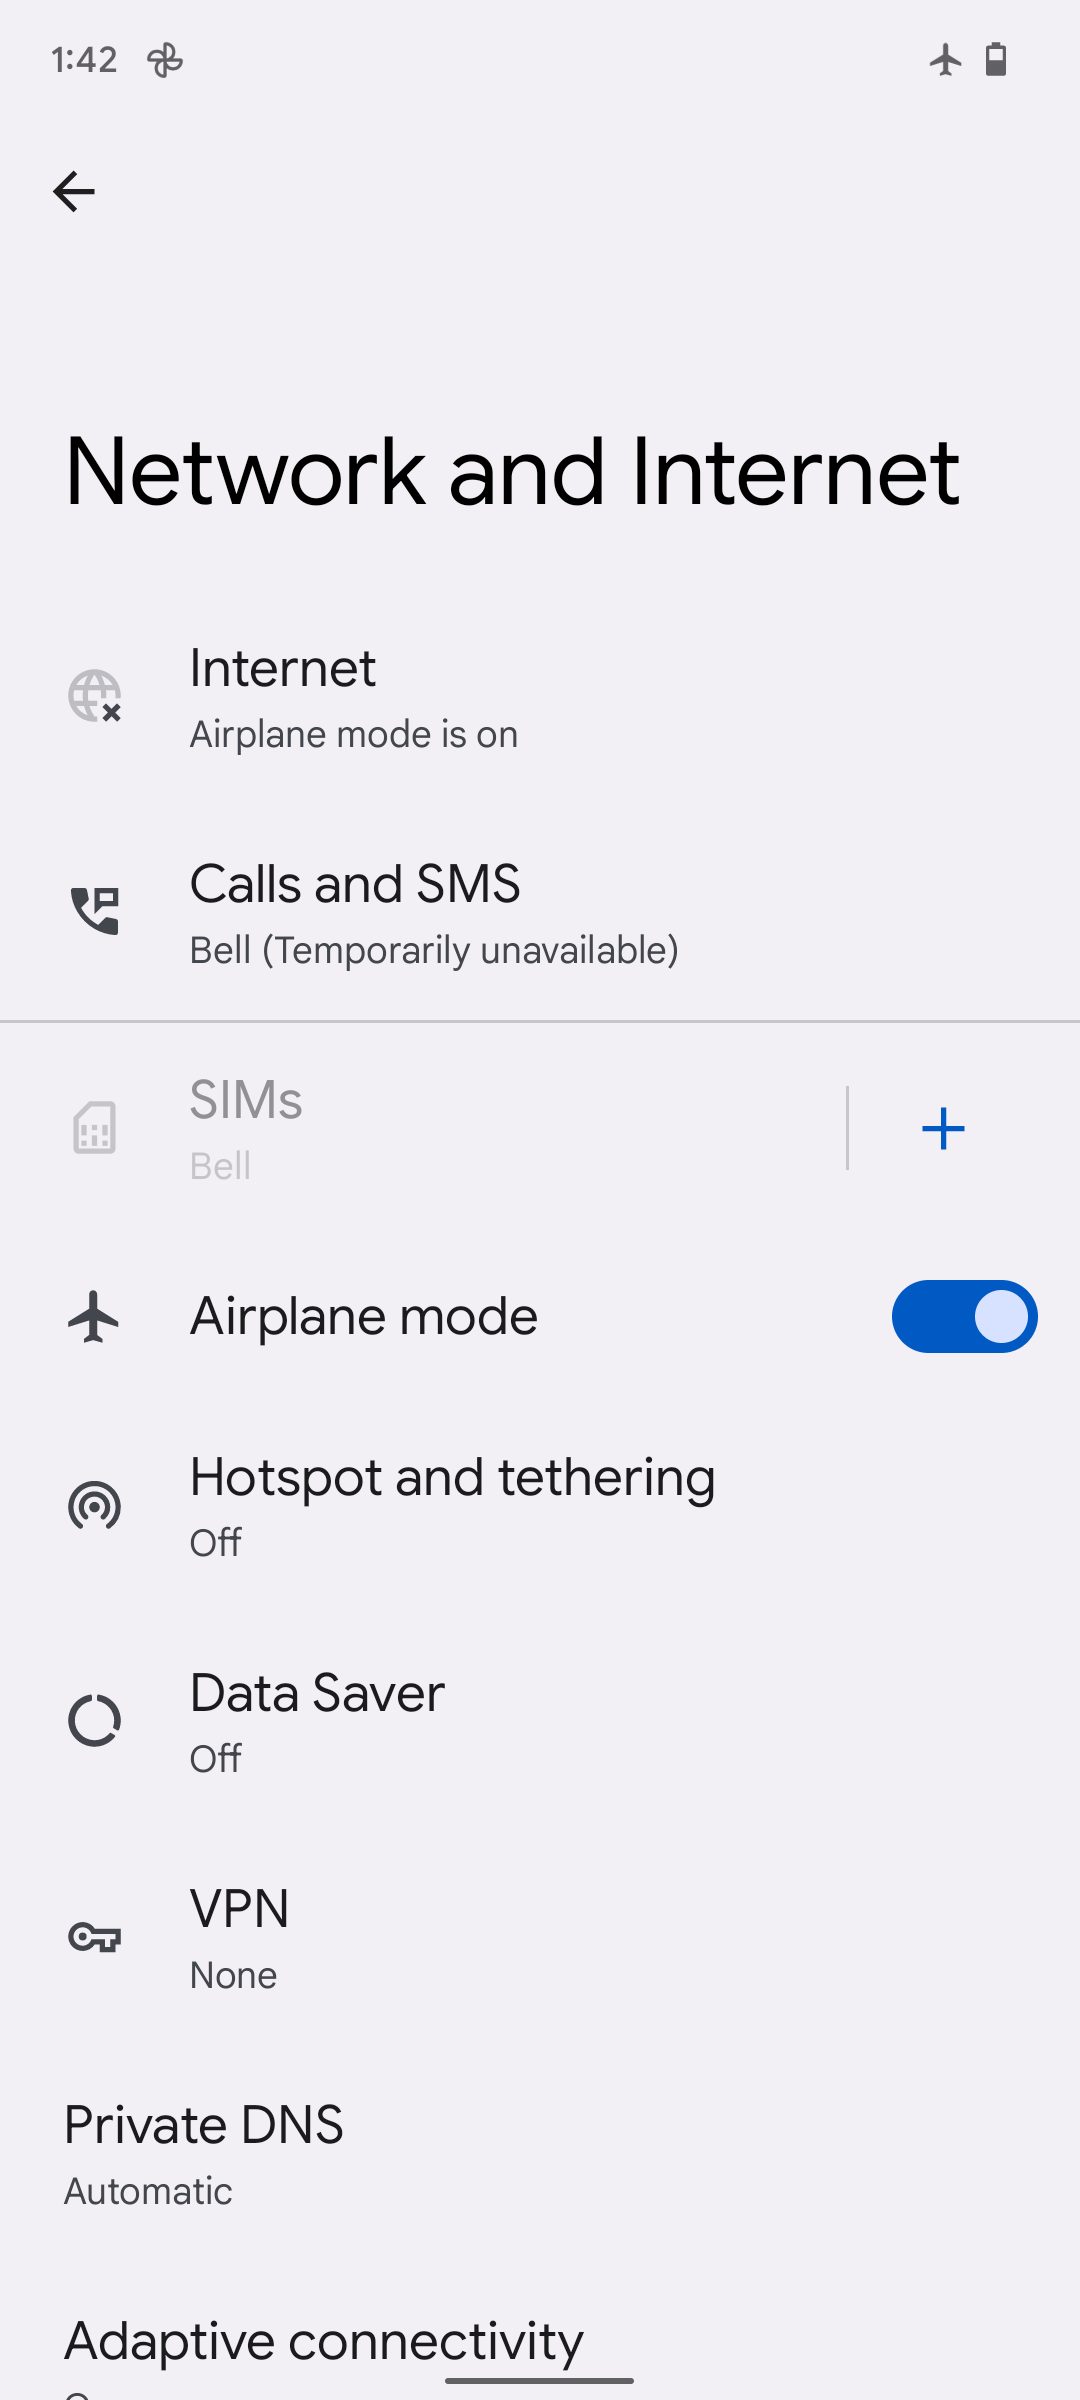 Airplane mode is on. Touch the Airplane mode slider again to turn it off.